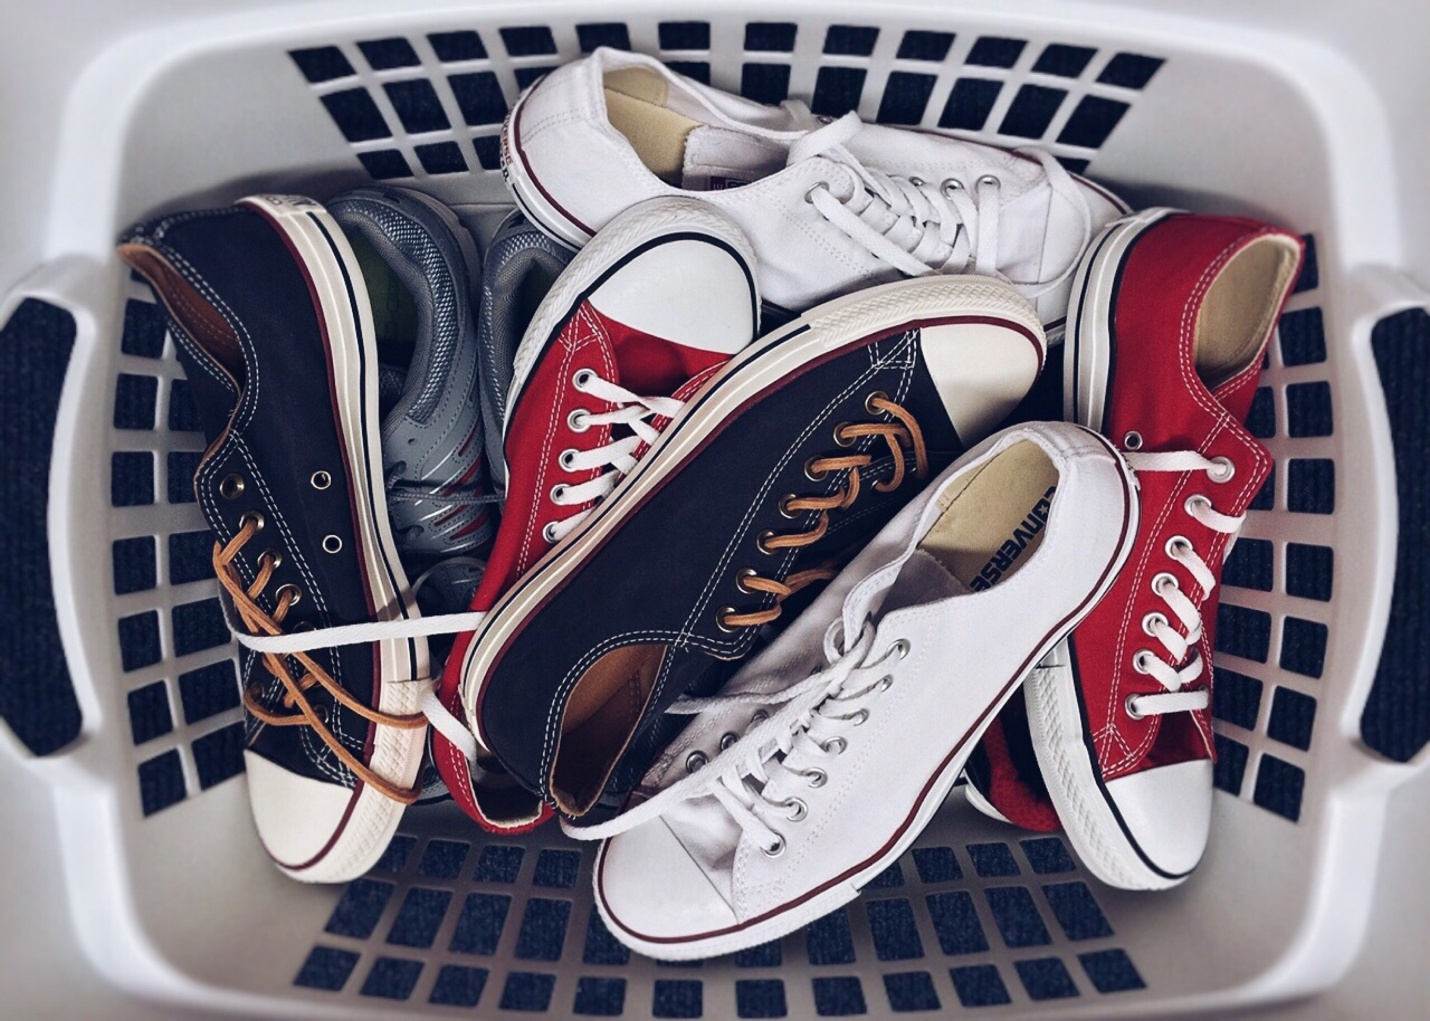  Different pairs of sneakers in the laundry basket